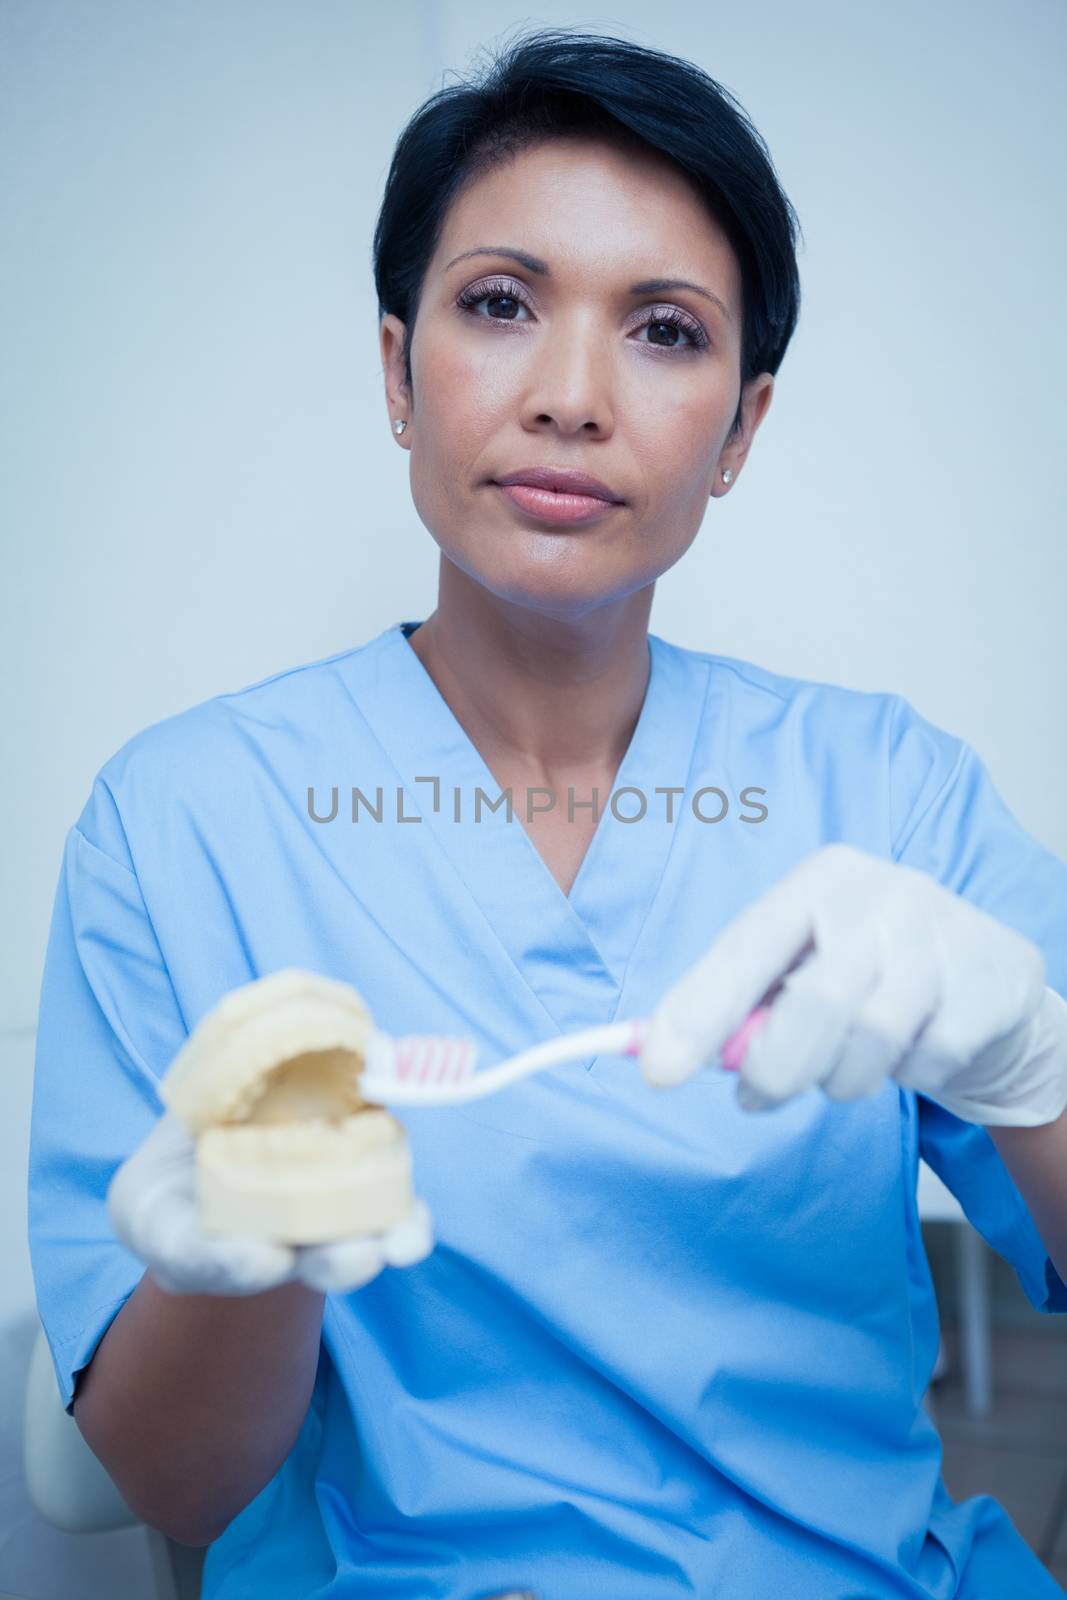 Dentist holding mouth model and toothbrush by Wavebreakmedia